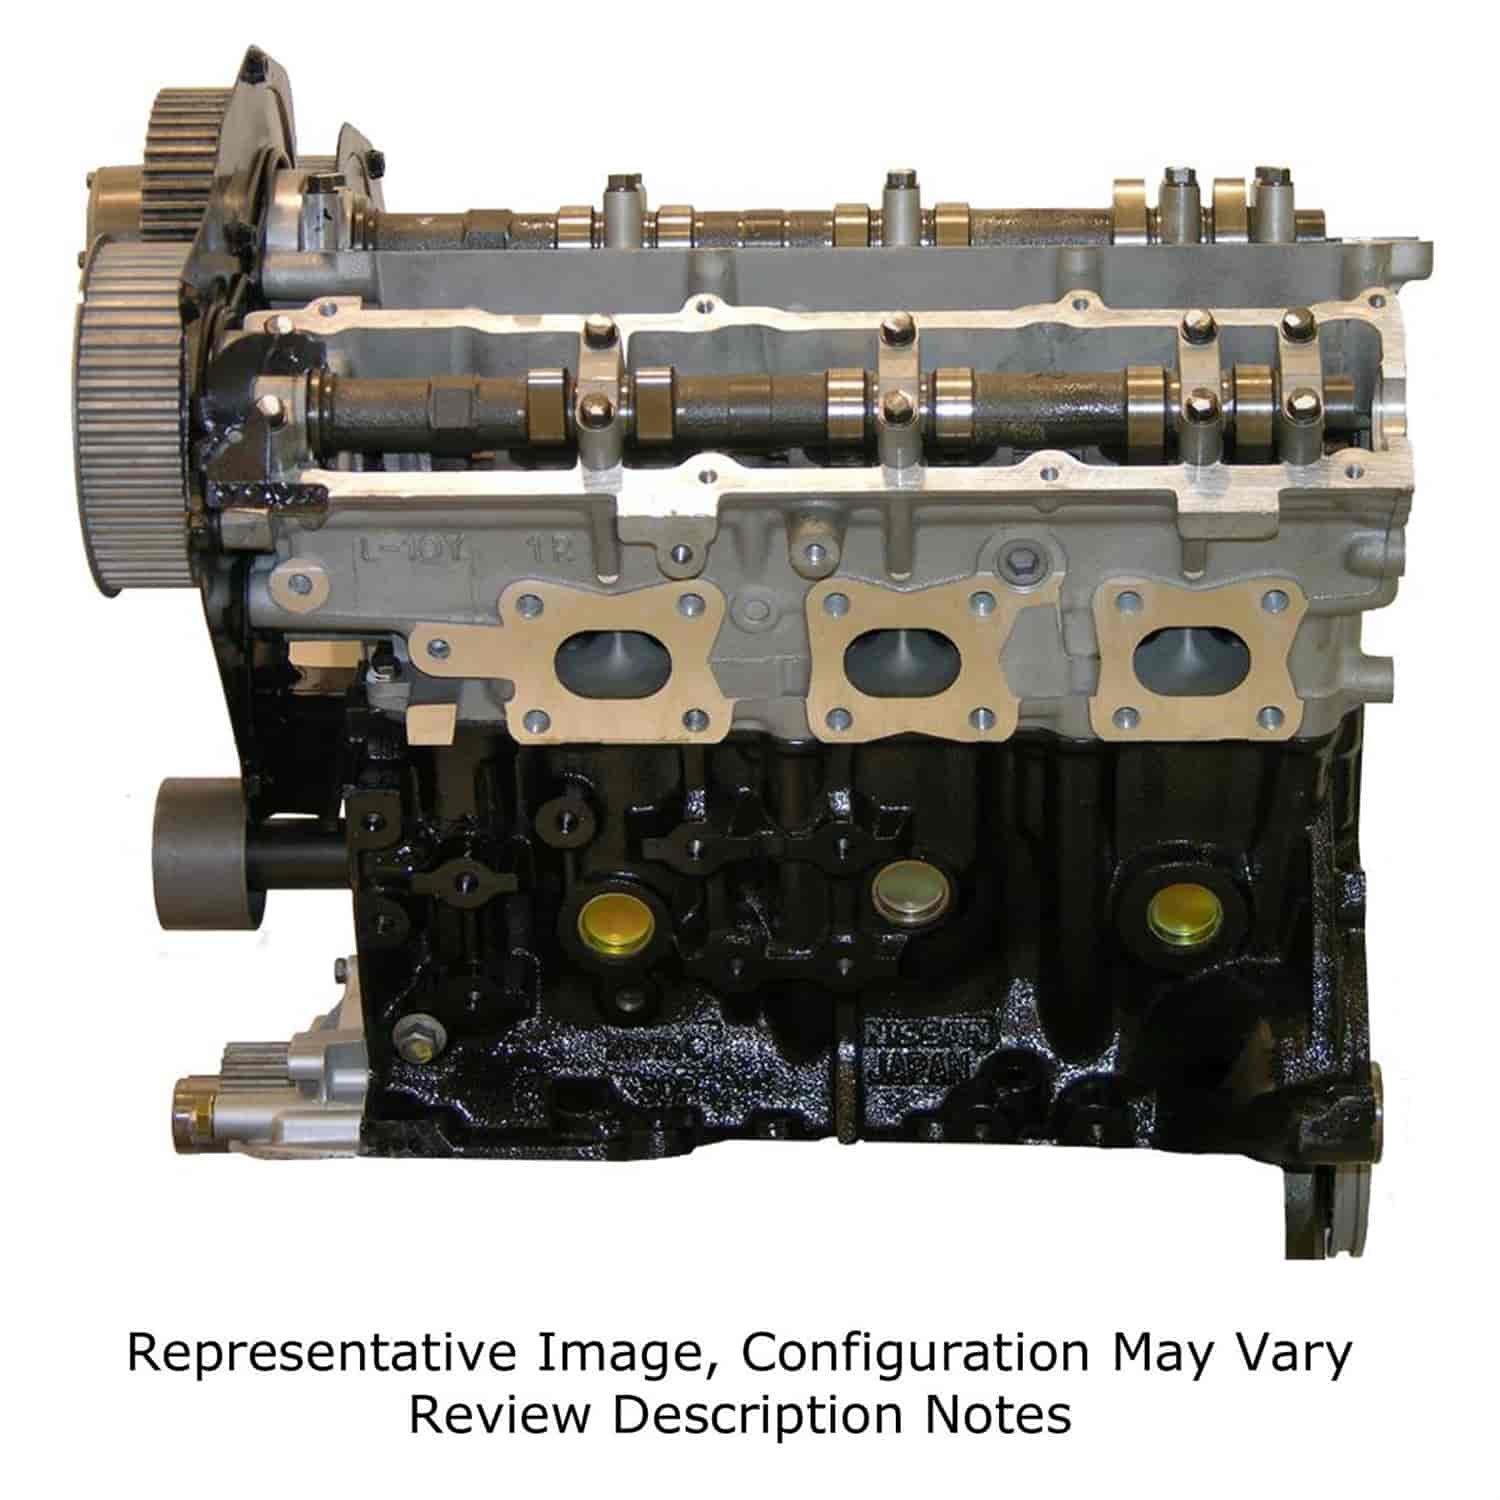 Remanufactured Crate Engine for 1993-1997 Infinity J30 & Nissan 300ZX with 3.0L V6 VG30DE